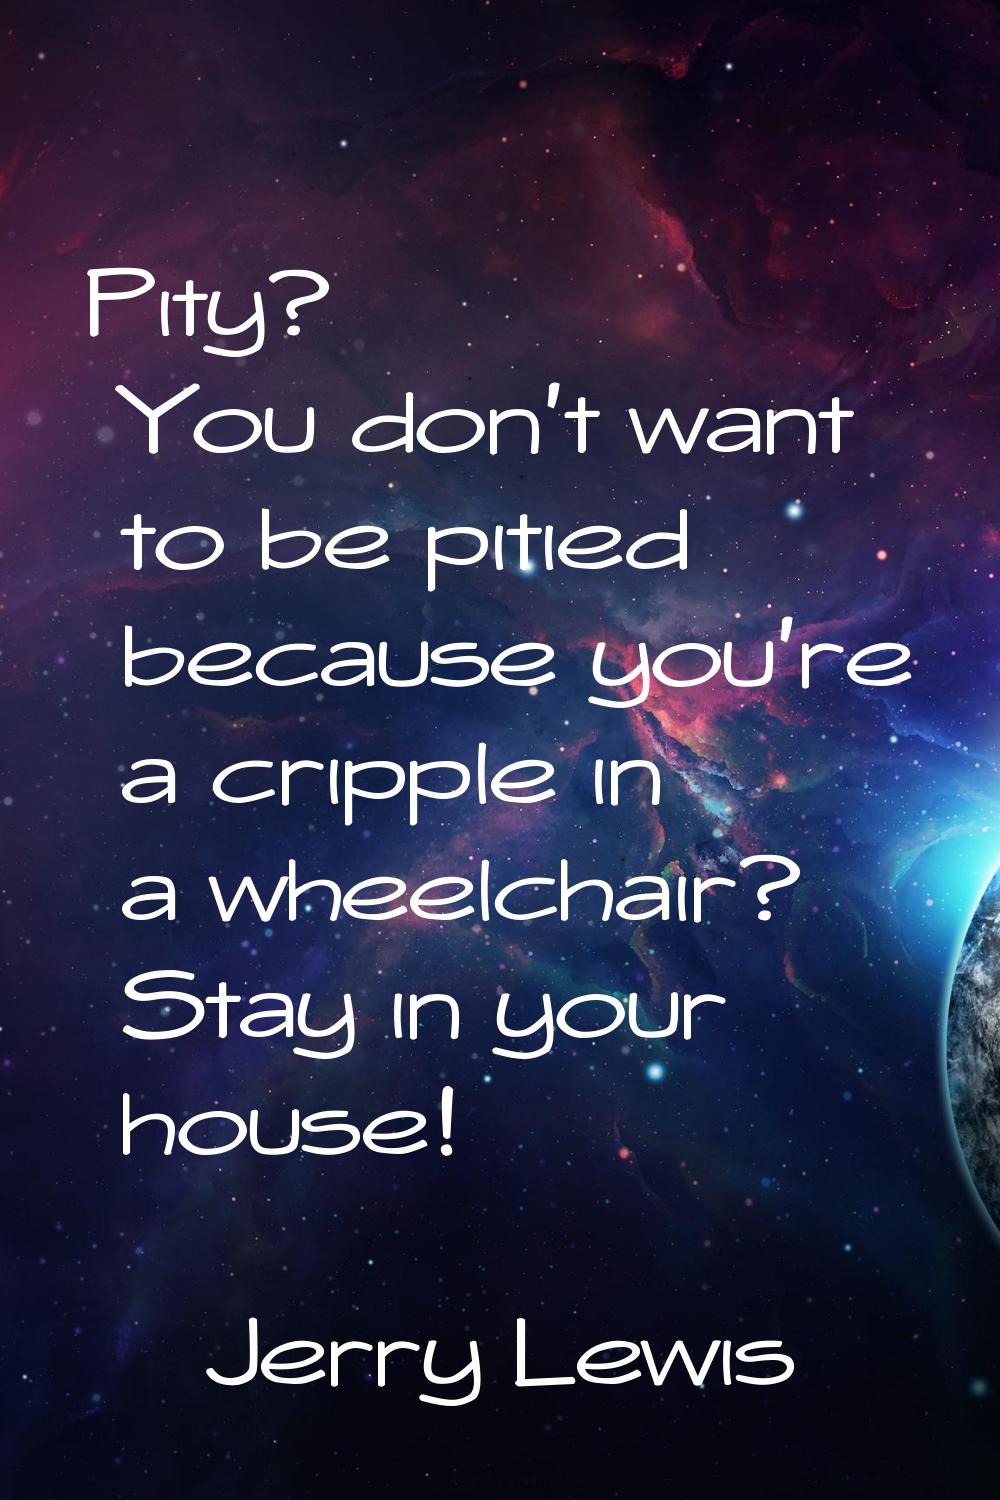 Pity? You don't want to be pitied because you're a cripple in a wheelchair? Stay in your house!